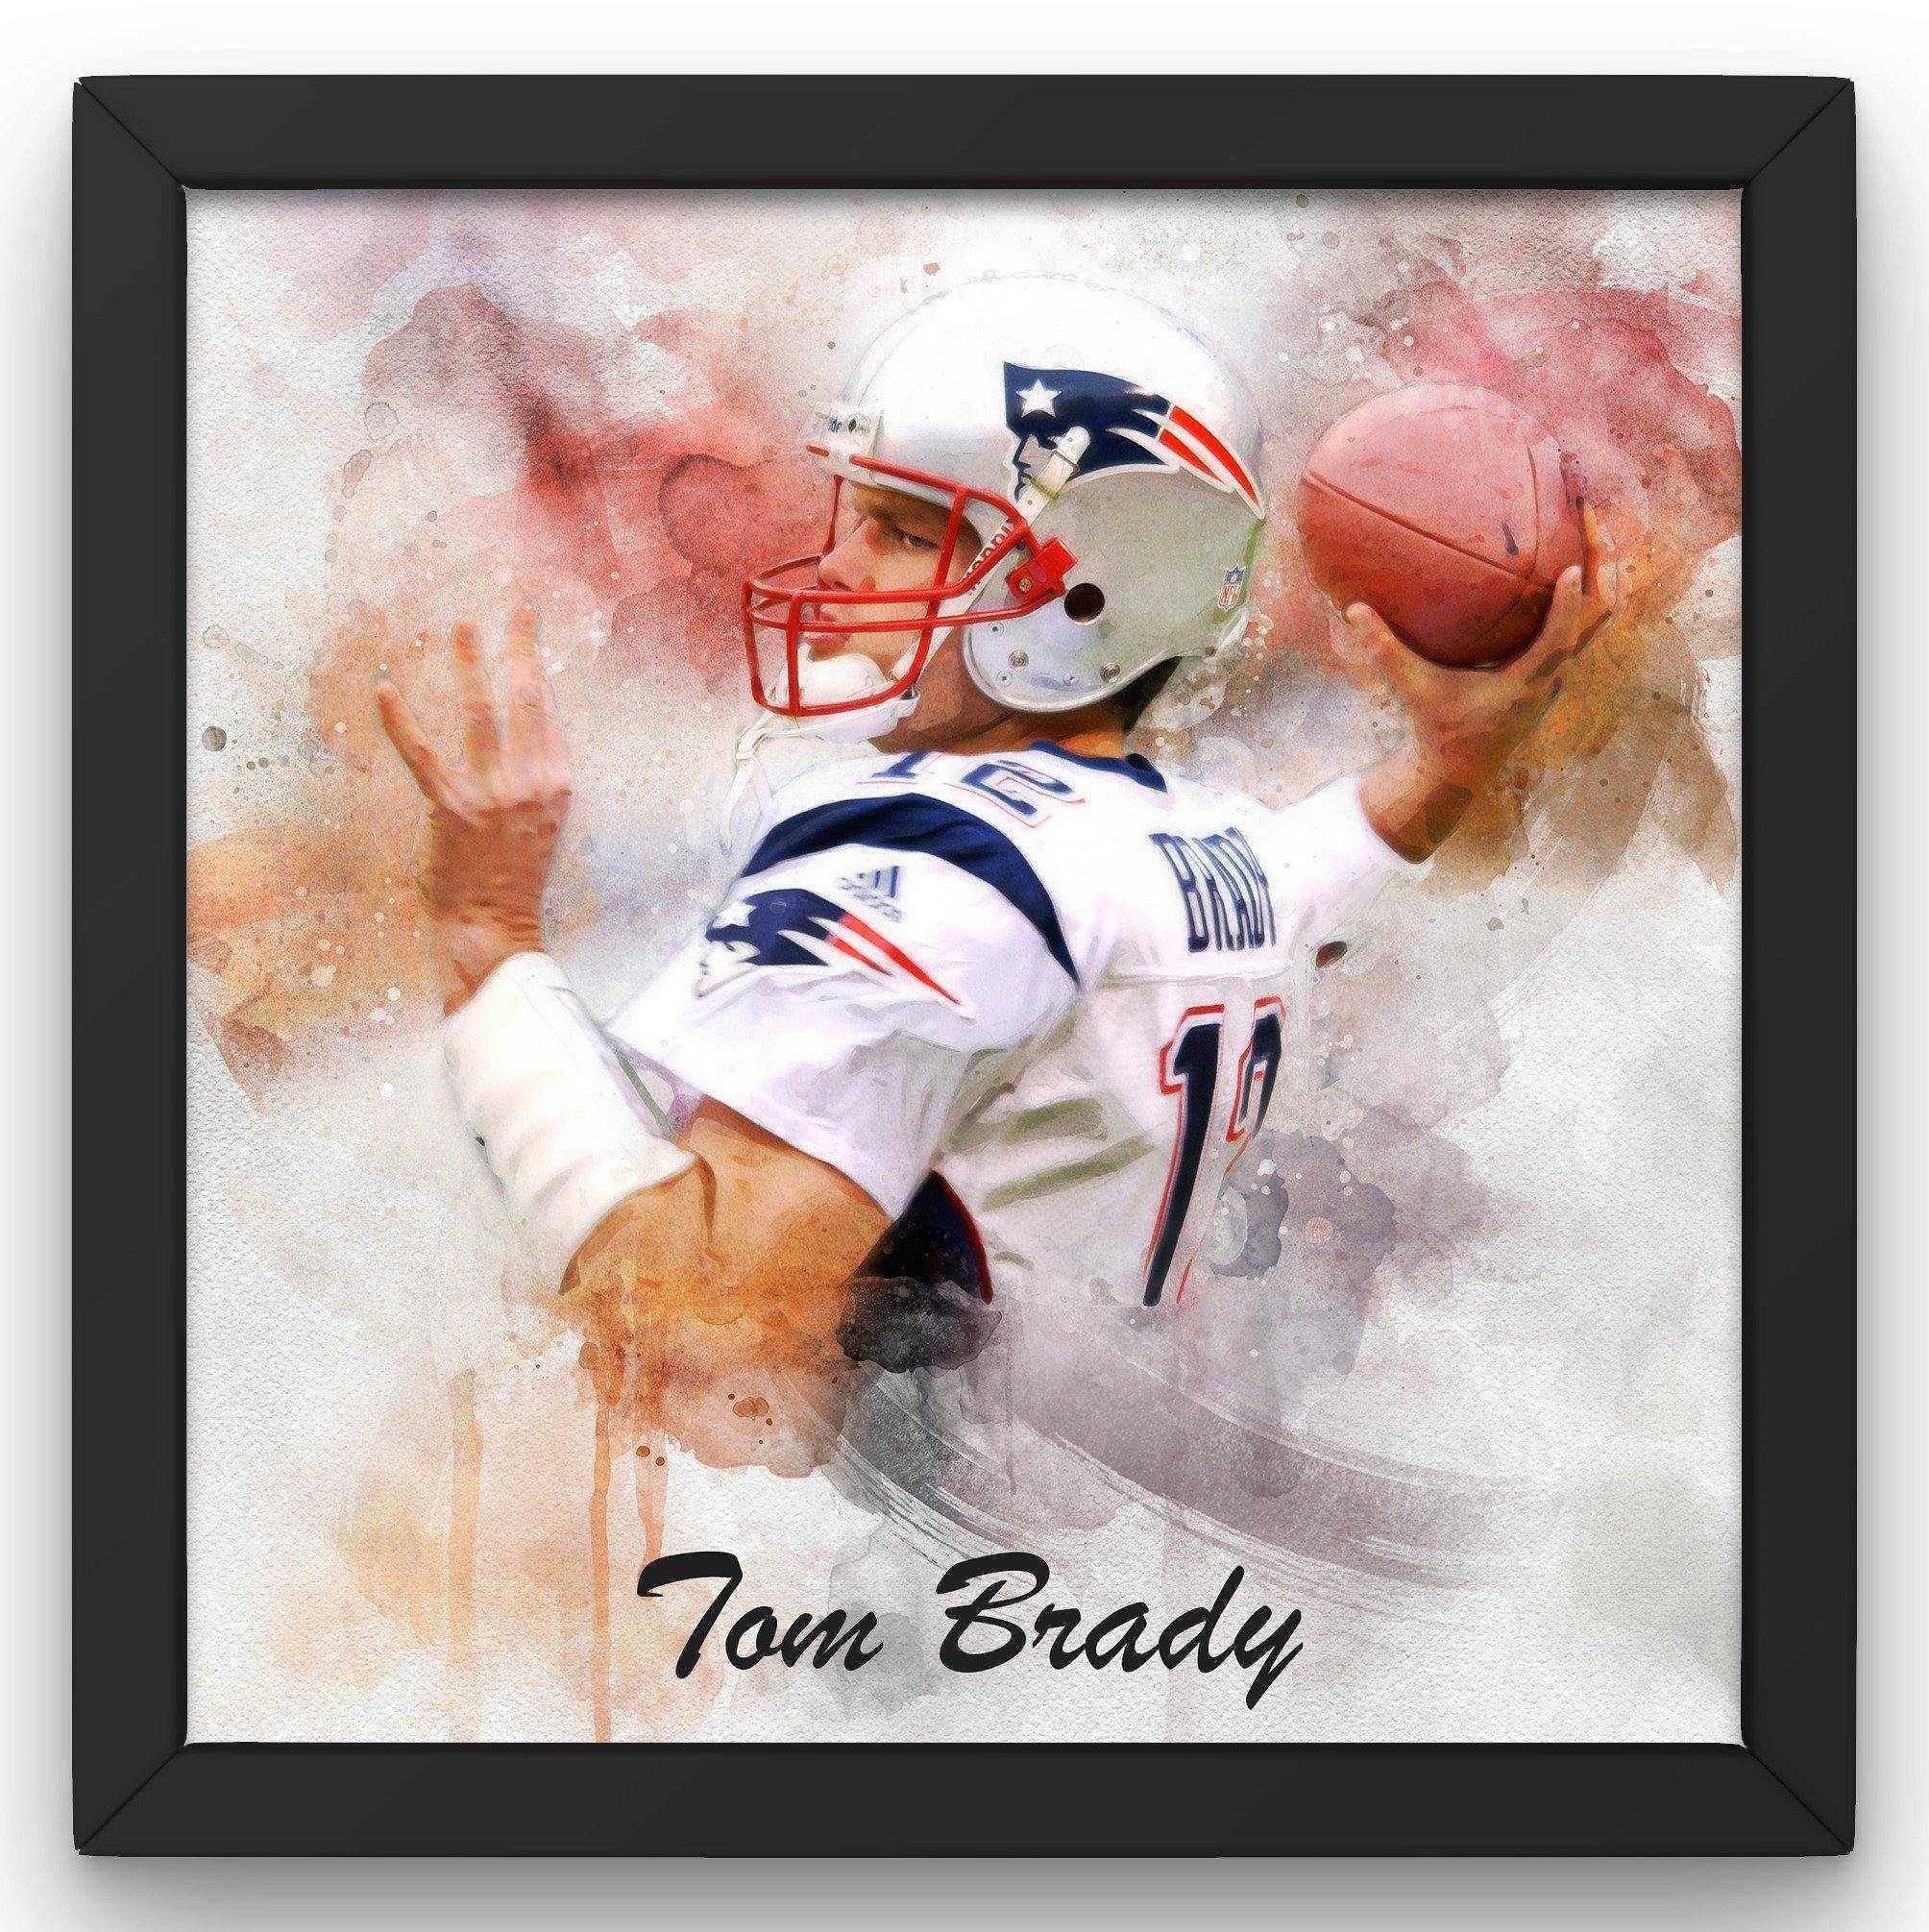 Tom Brady Poster/Canvas, Football Painting, Man Cave Decor, Man Cave Gift, Tampa Bay Buccaneers, Tom Brady the GOAT - FromPicToArt